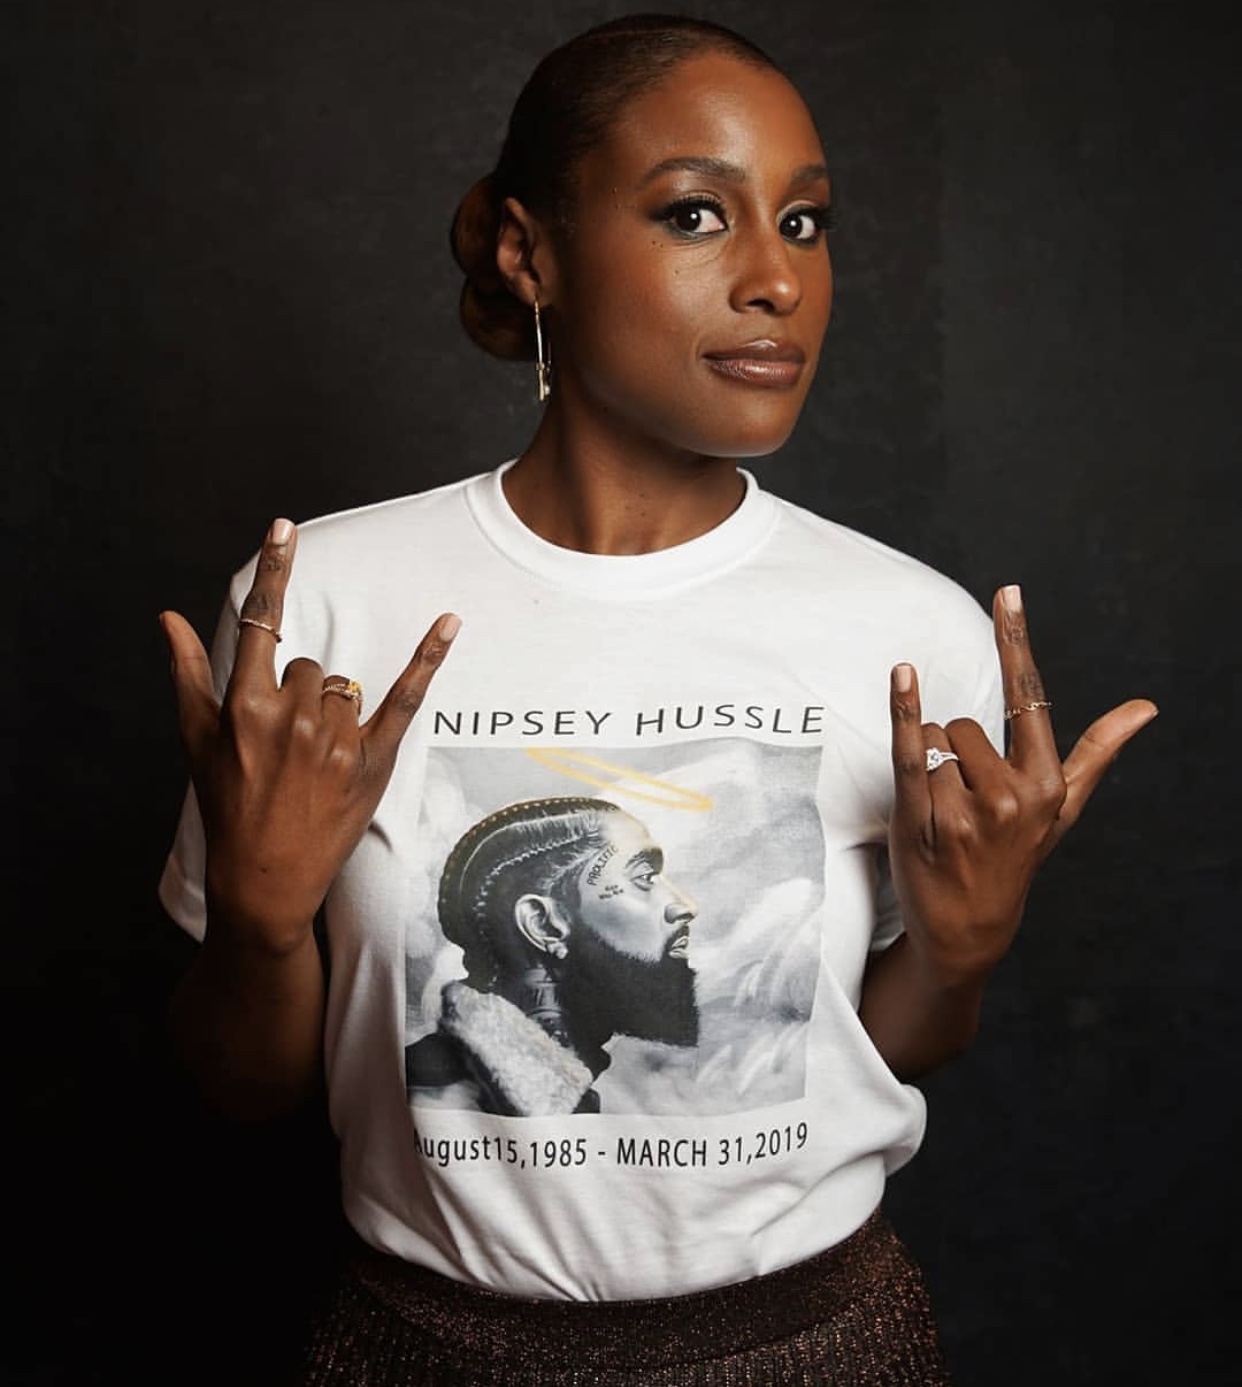 Issa Rae showed love on the ‘Gram, wearing a t-shirt with artwork by @DaRealIcon.